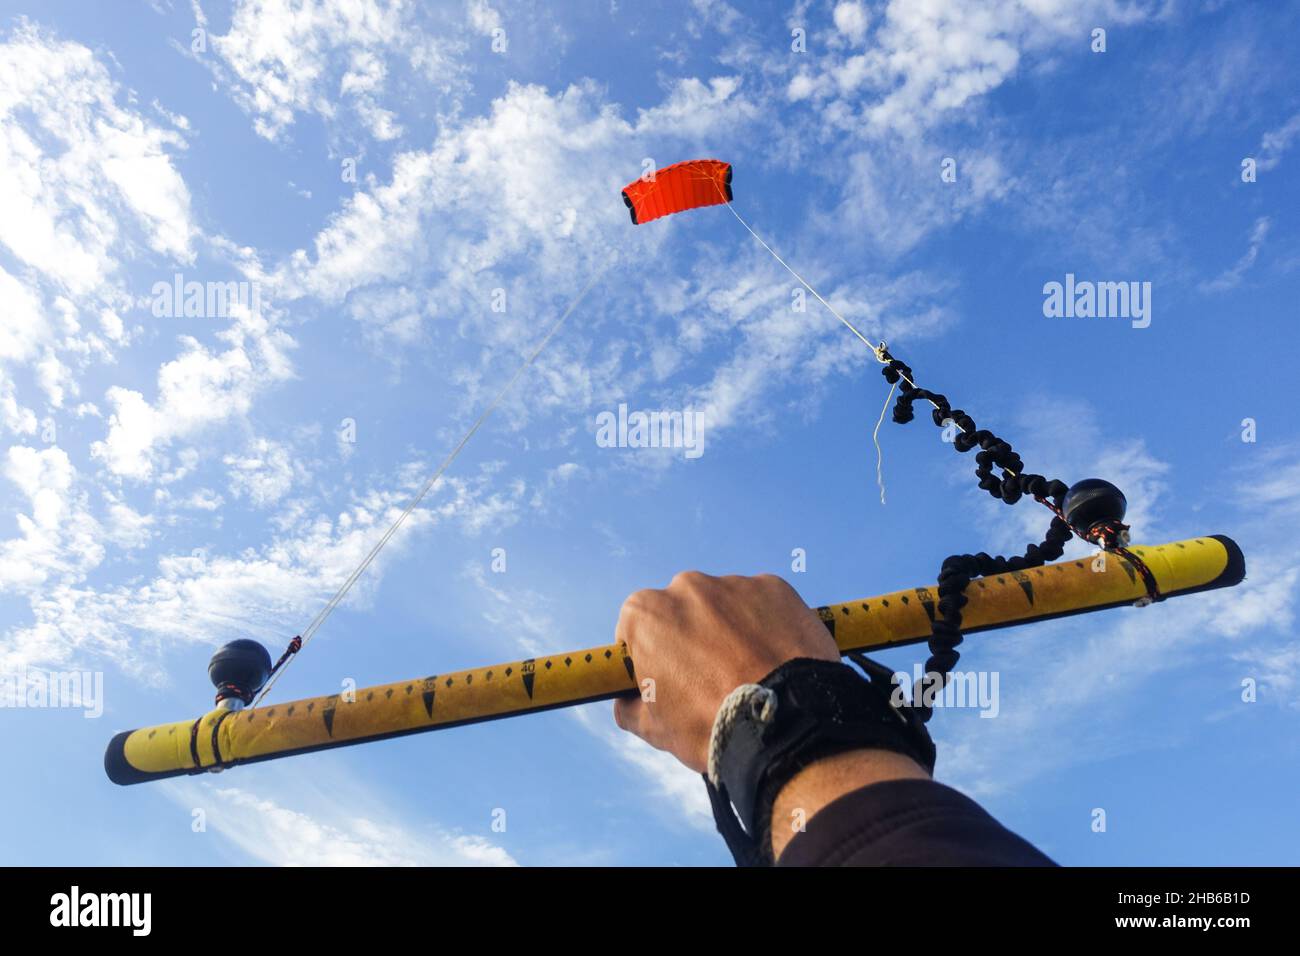 Hand holding a kite on the beach of Blouberg, Cape Town, South Africa Stock Photo